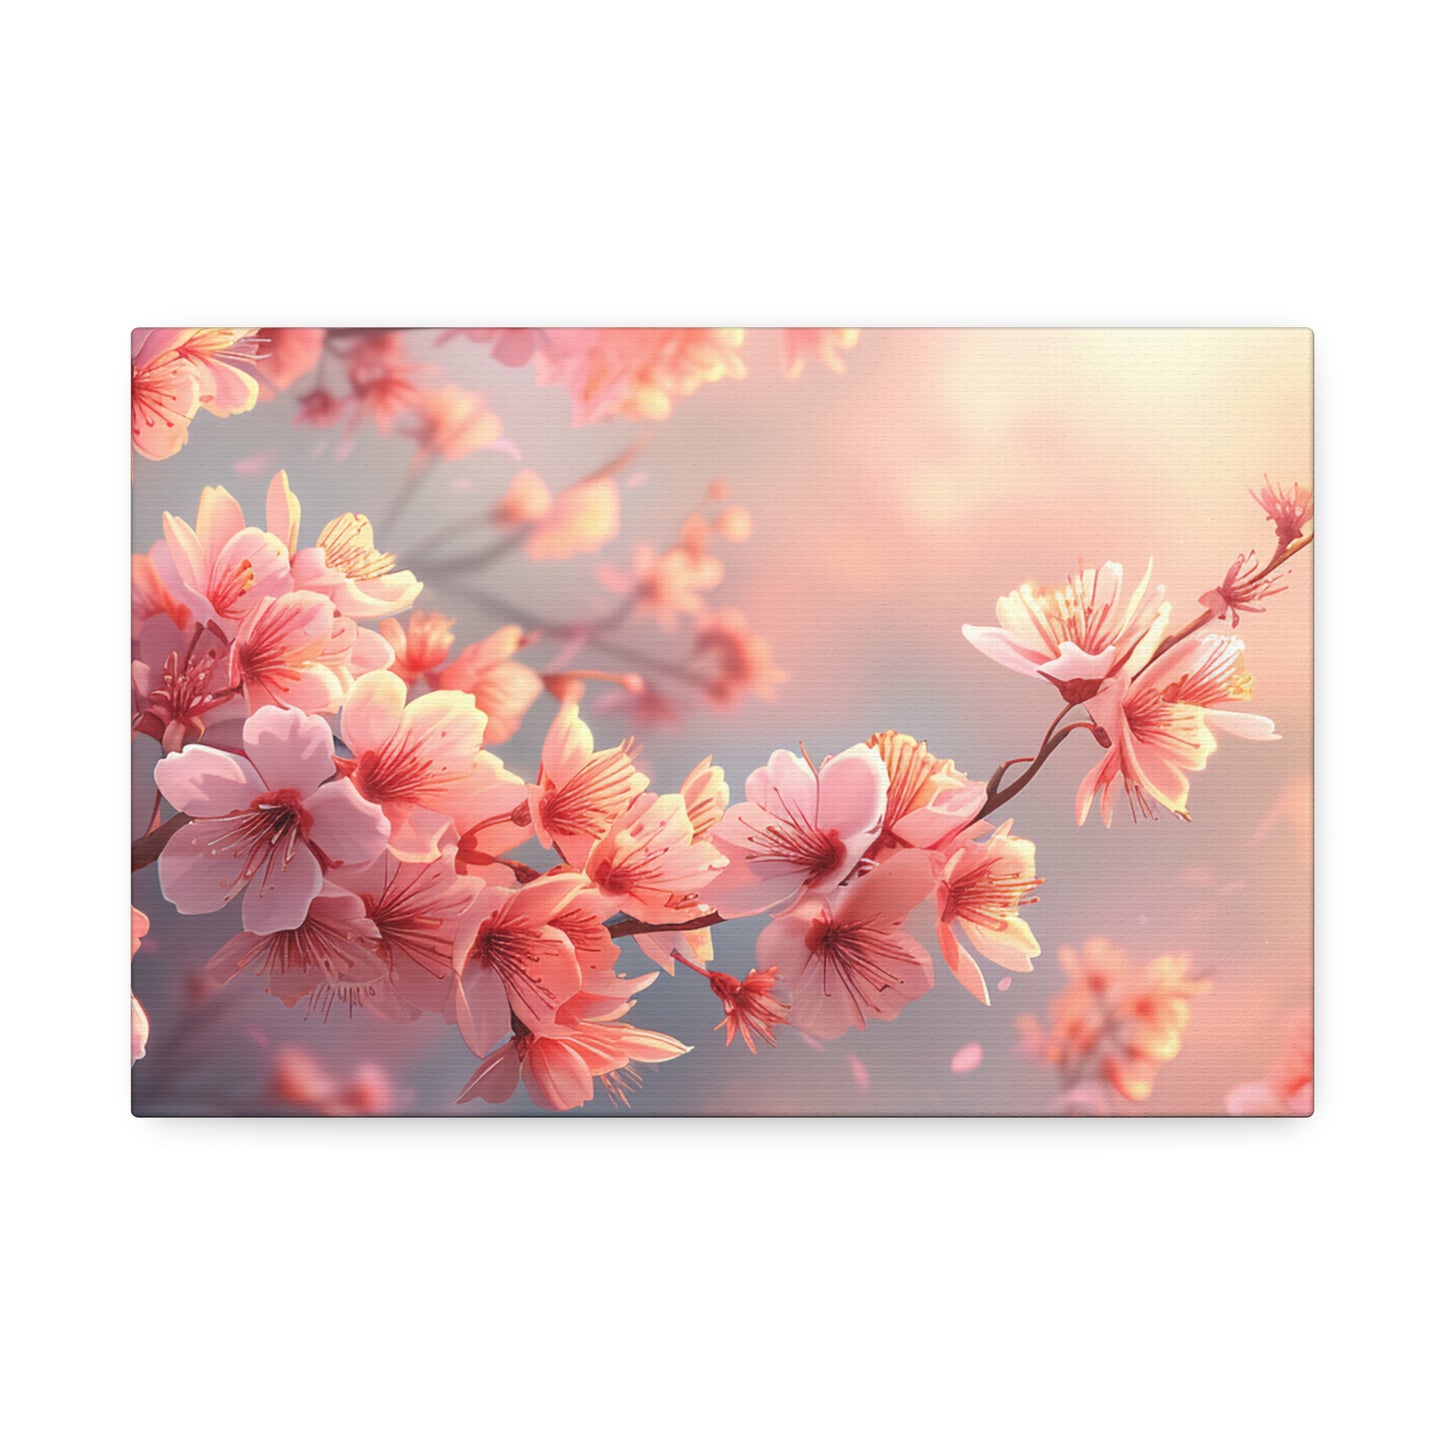 Cherry Blossom in Bloom Canvas Print